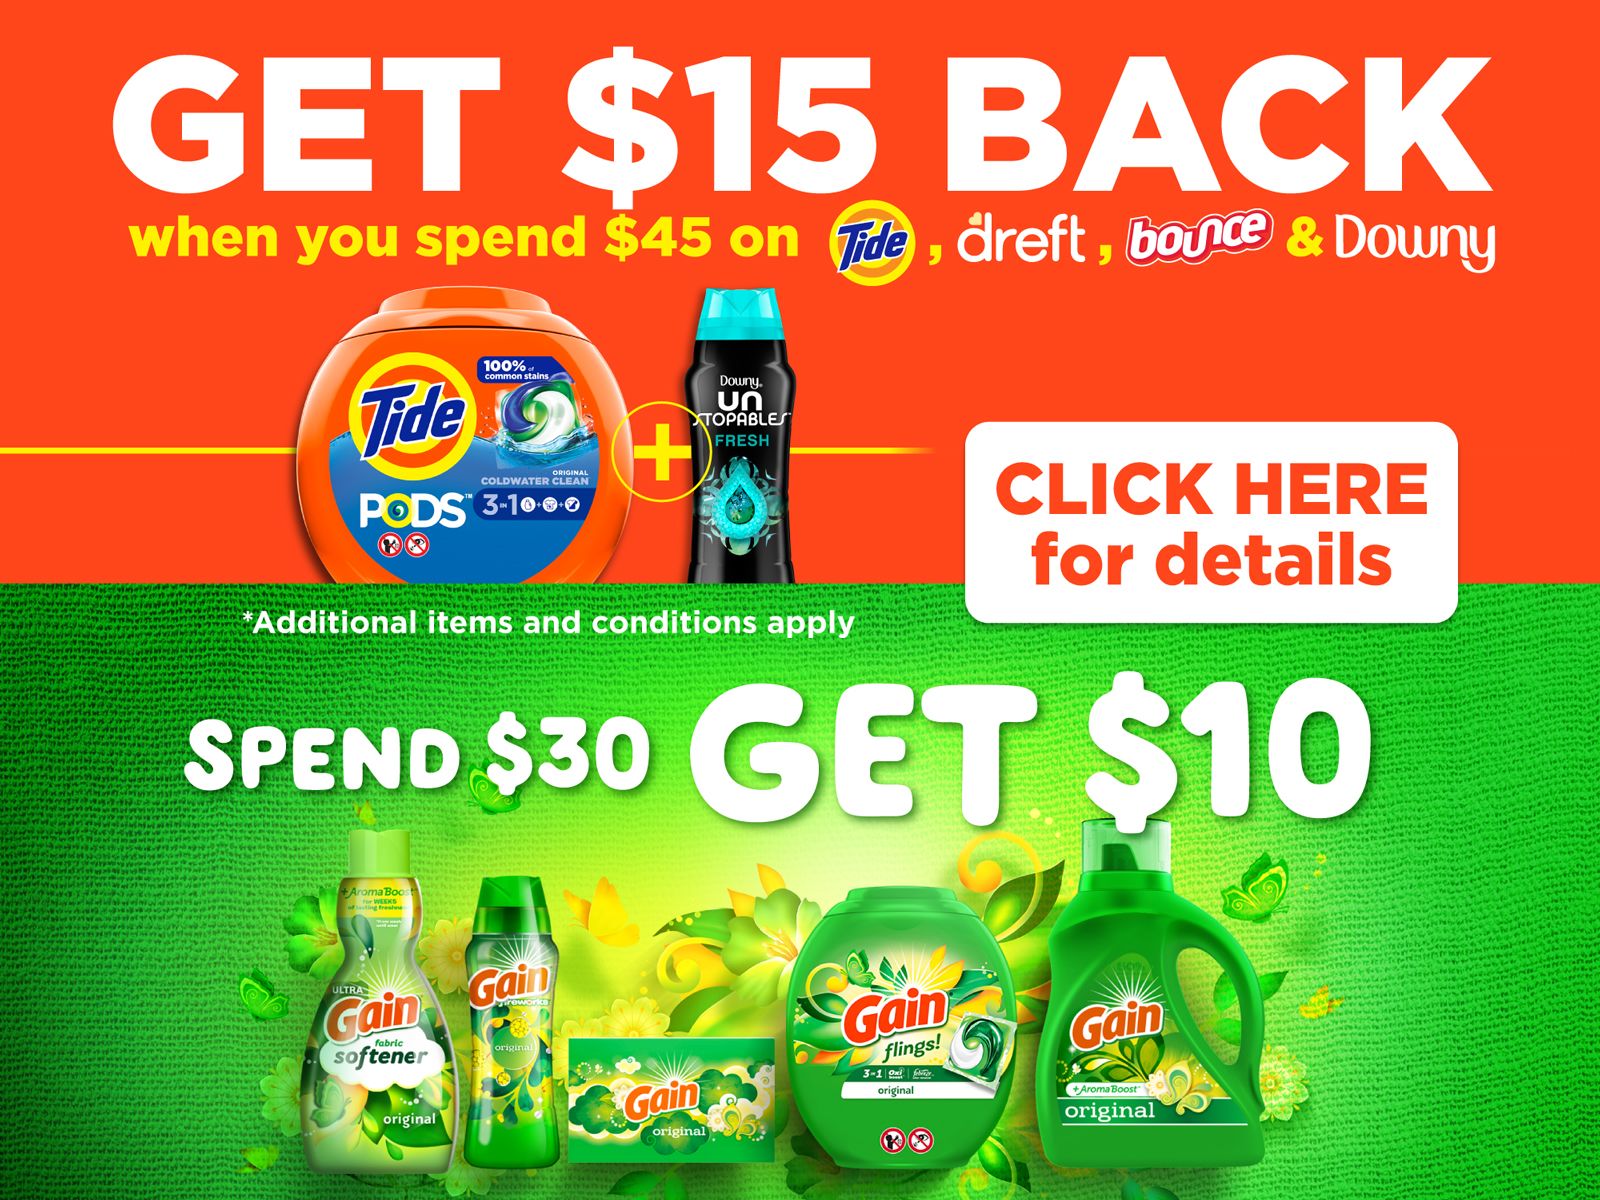 Downy Tide Gain Mail In Rebates Deals At Publix Southern Savers